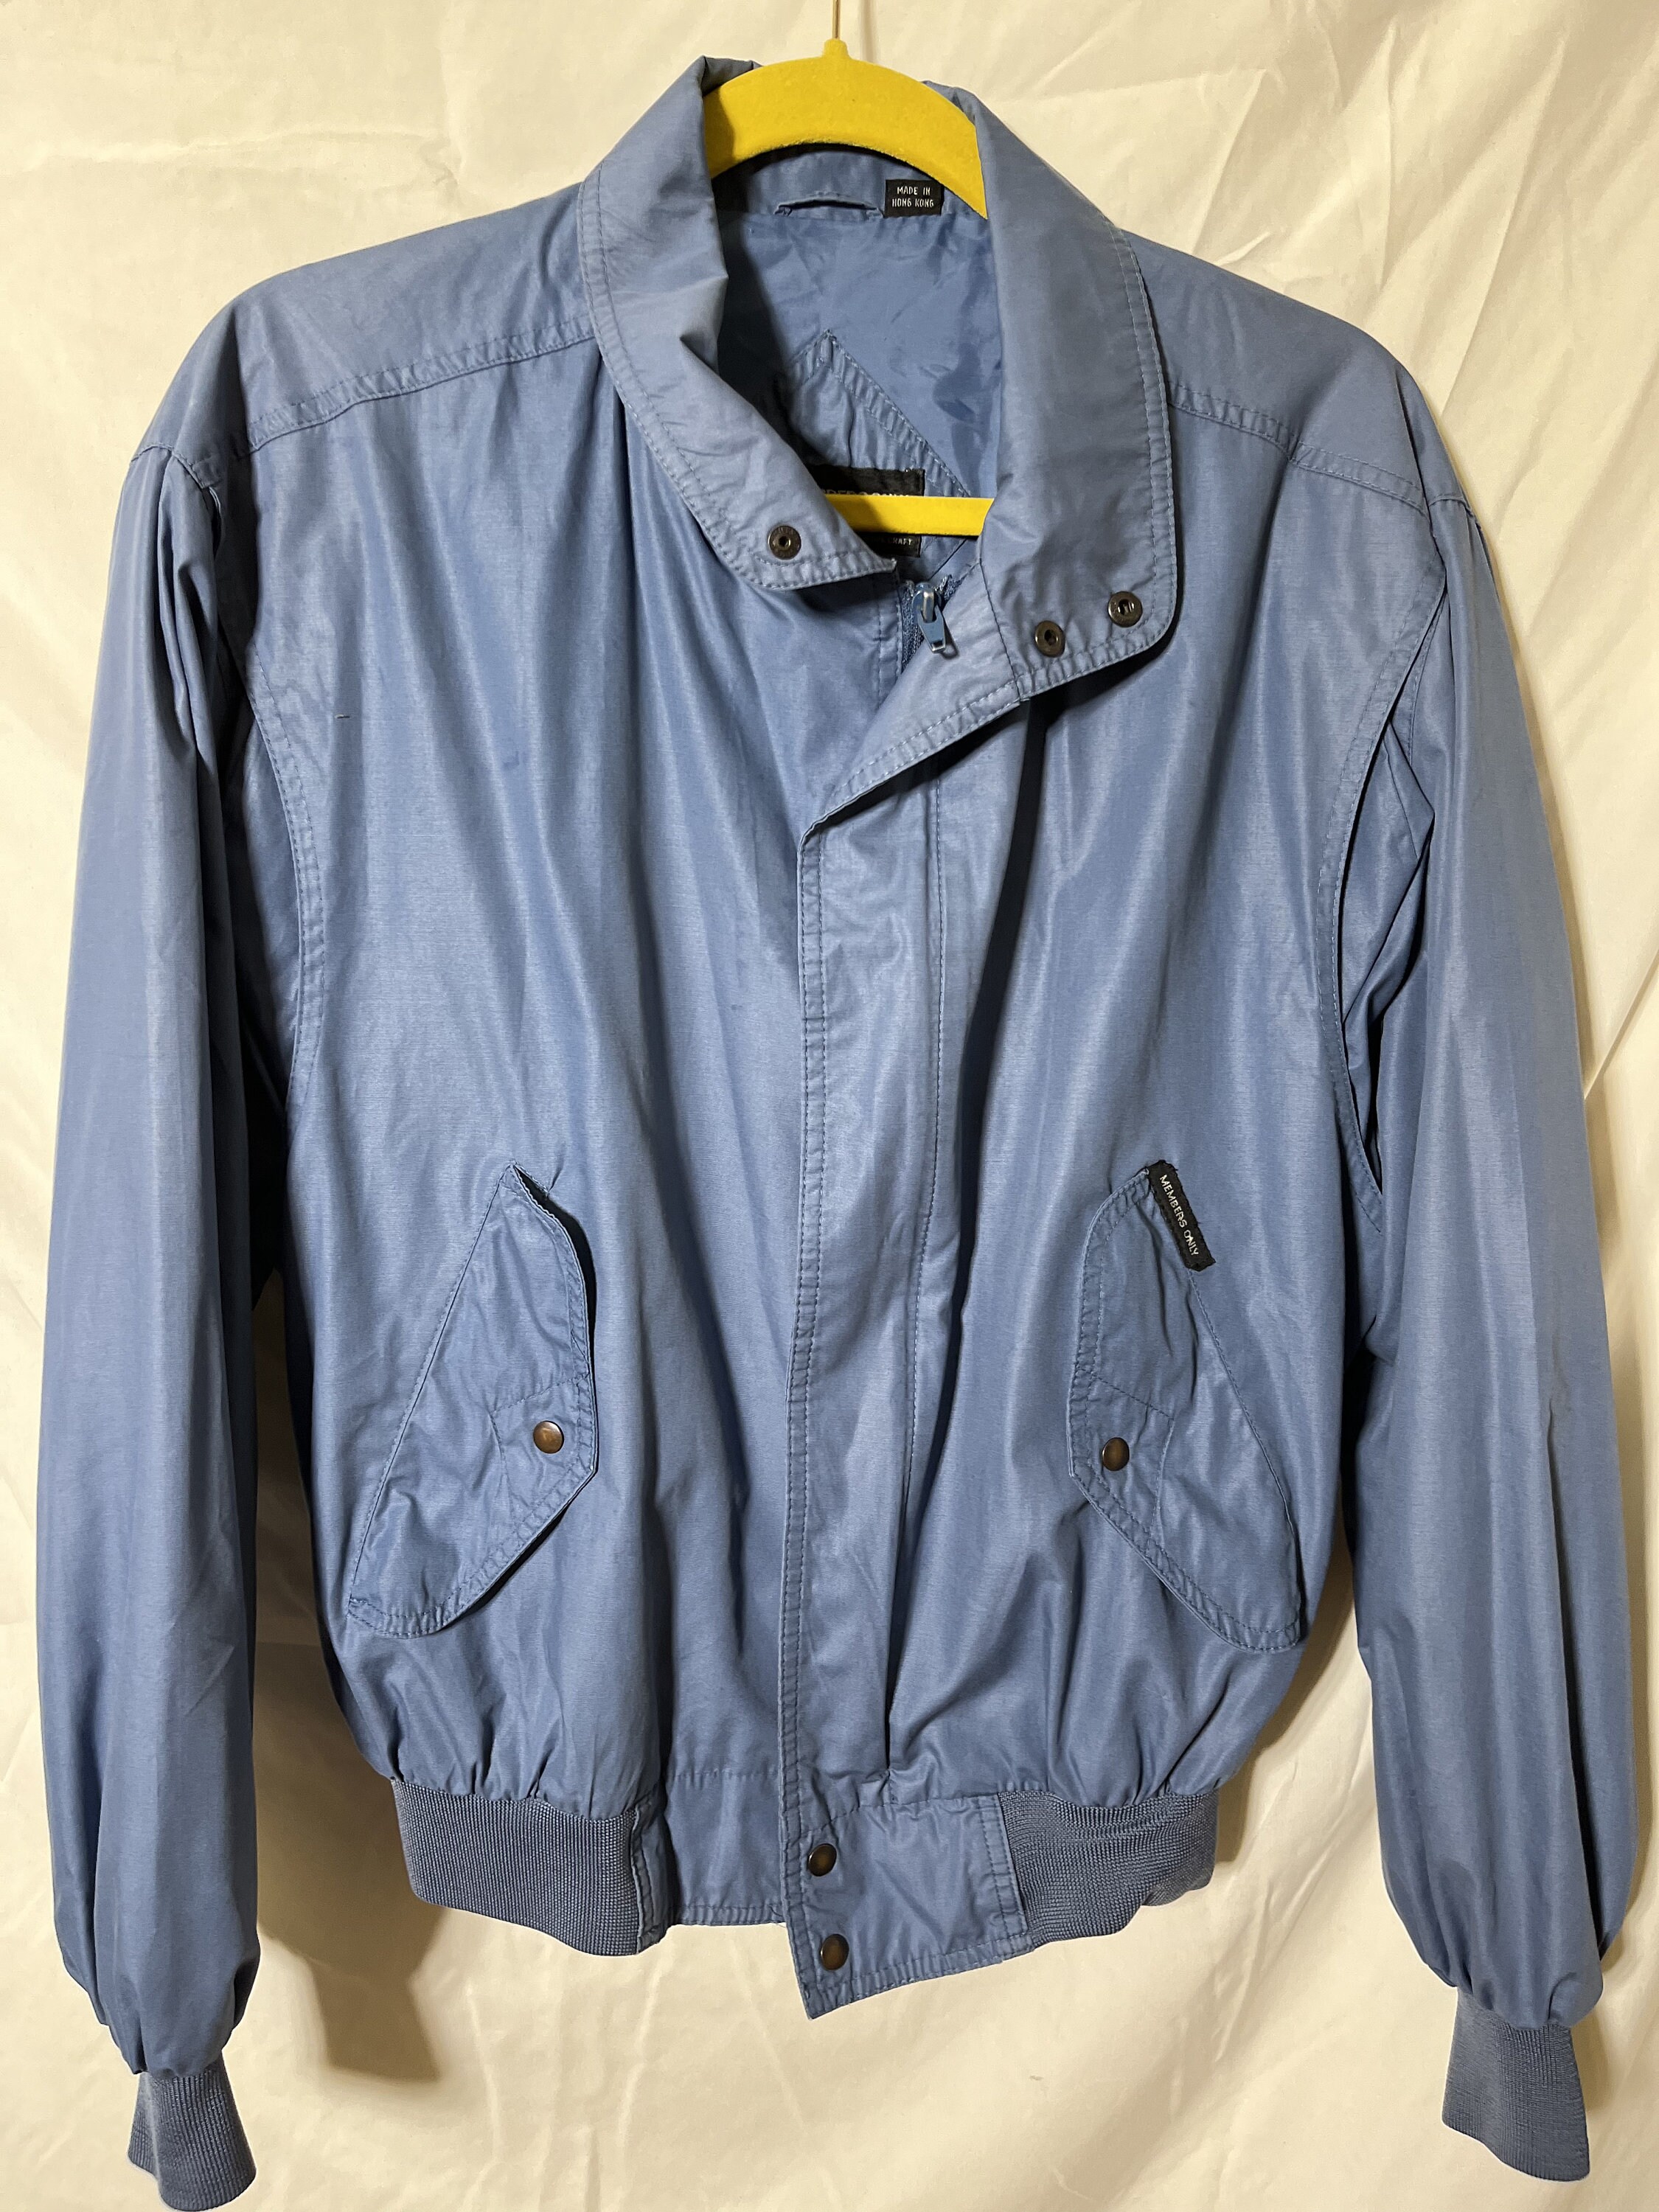 Member's Only Jacket – The Vintage Twin